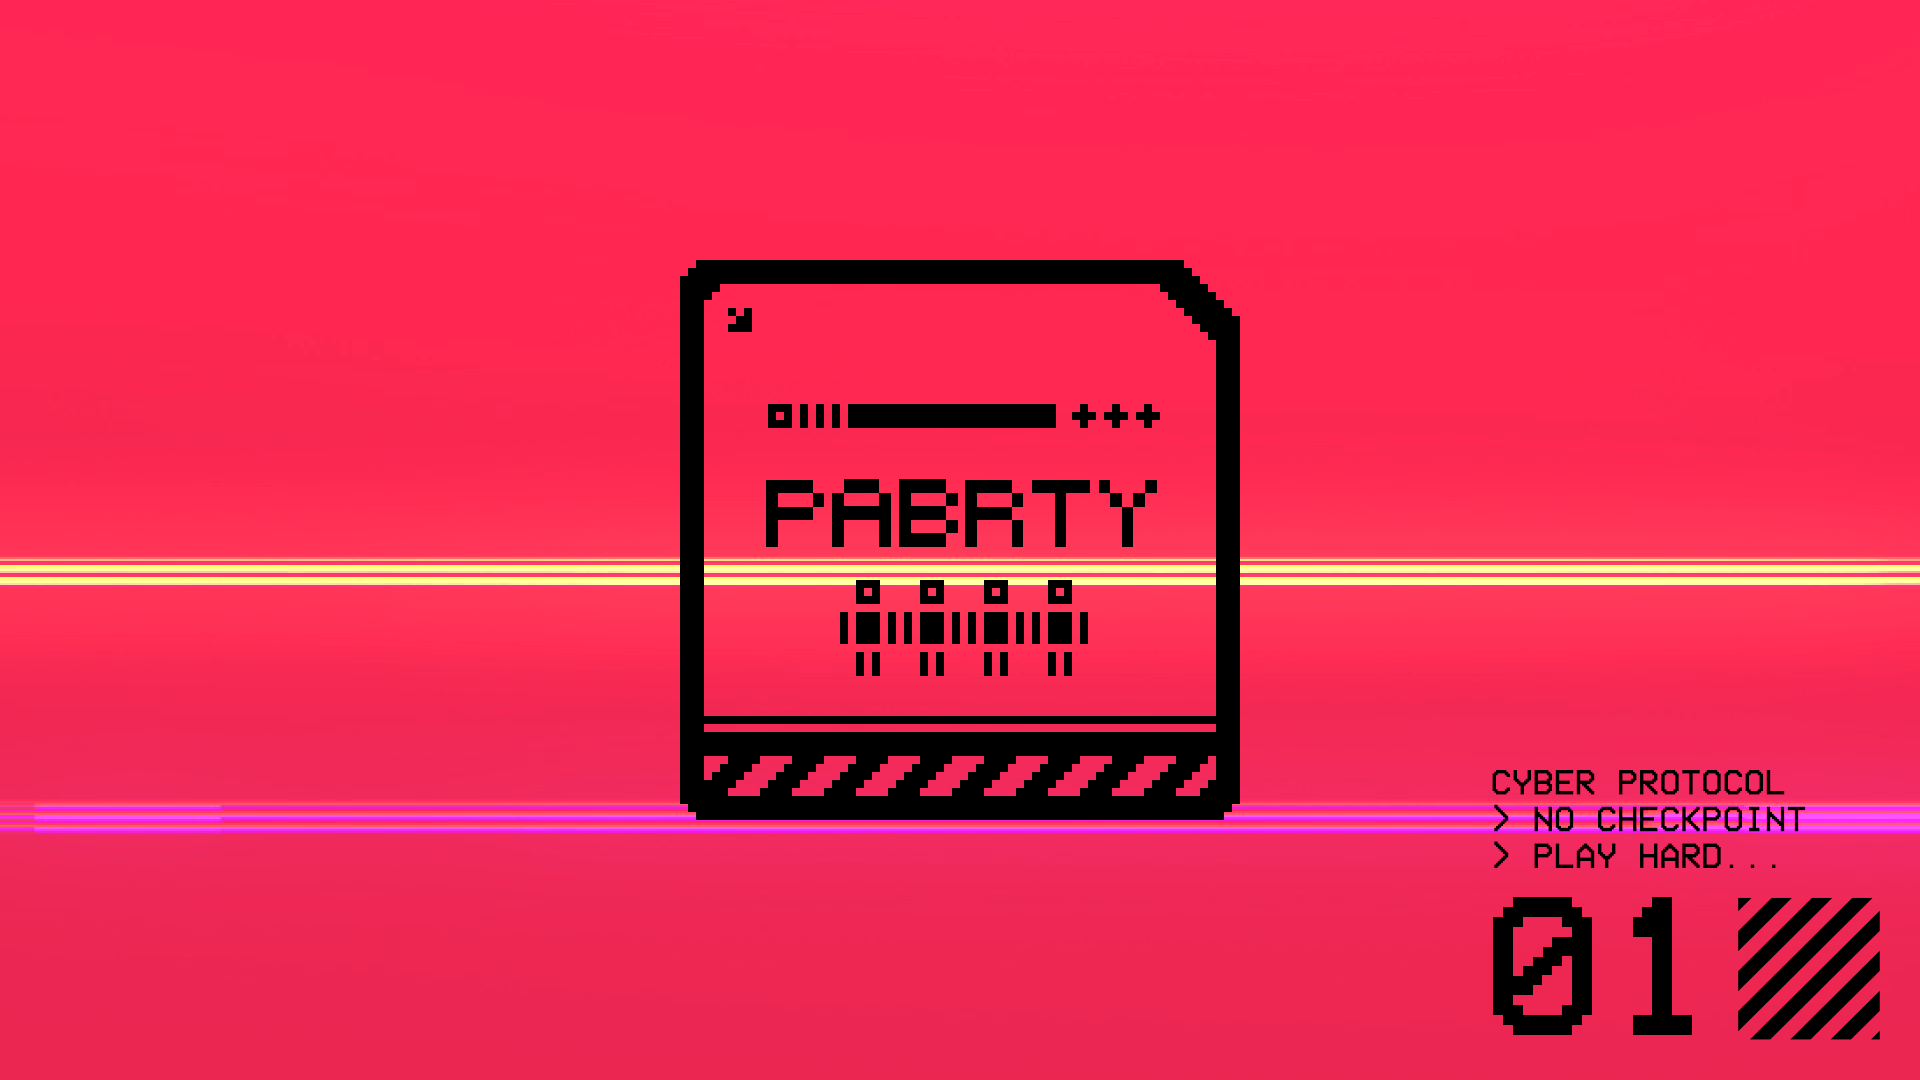 Icon for Synthwave Party